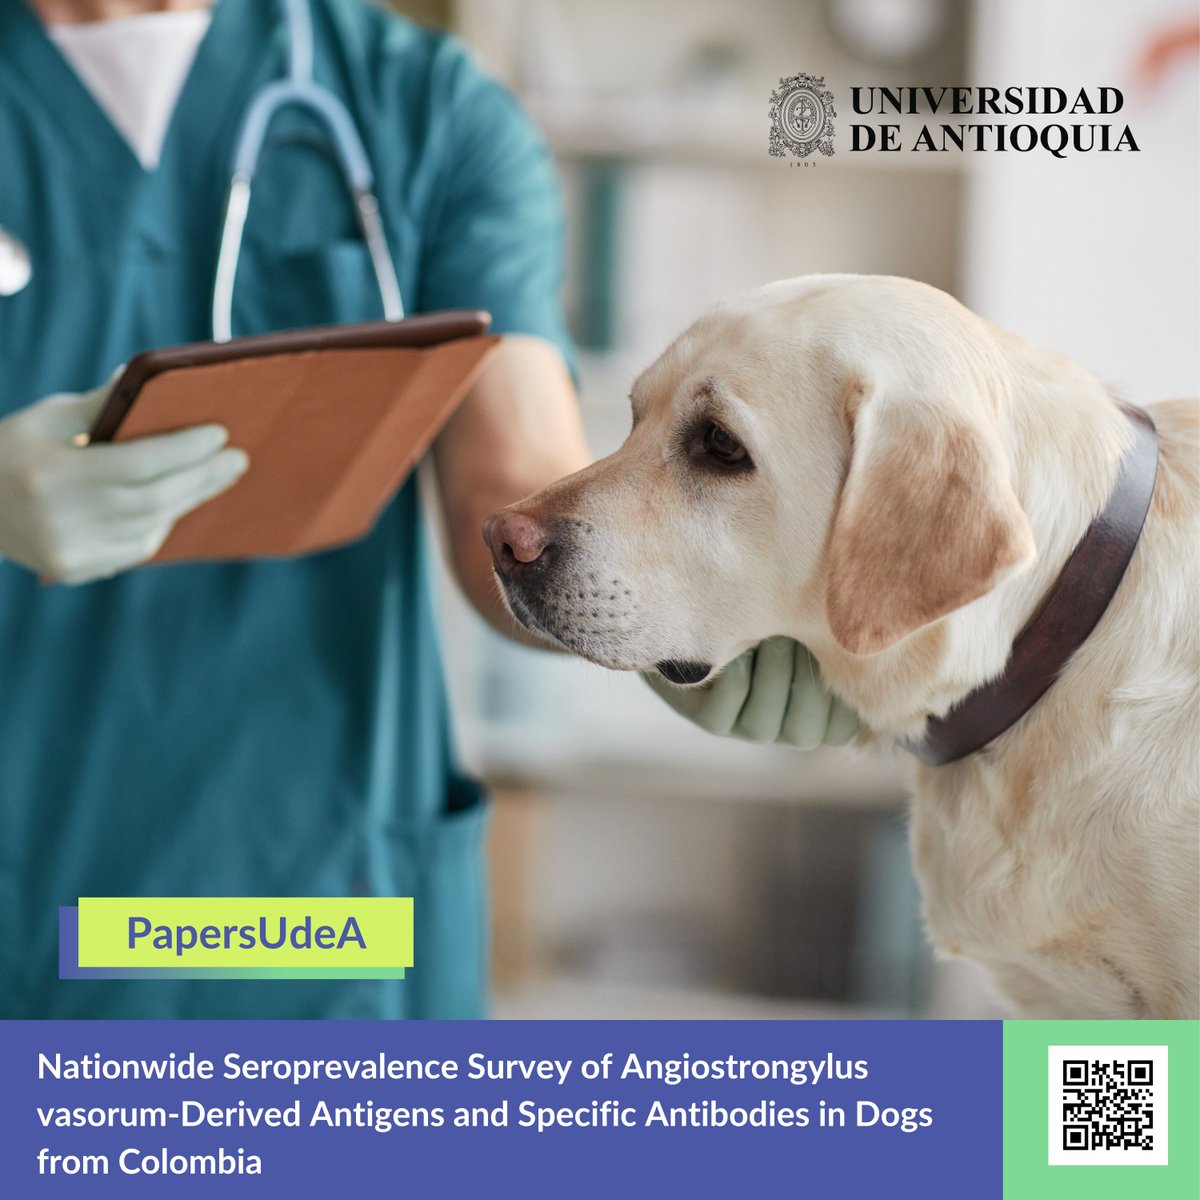 #PapersUdeA - ⚠️🐶 With 1.05% of positive cases for antigens, a study reveals the presence of Angiostrongylus vasorum, which puts Colombian dogs at risk of clinical manifestations such as respiratory problems, among others. 

📌 More at:  bit.ly/3T9LFS8